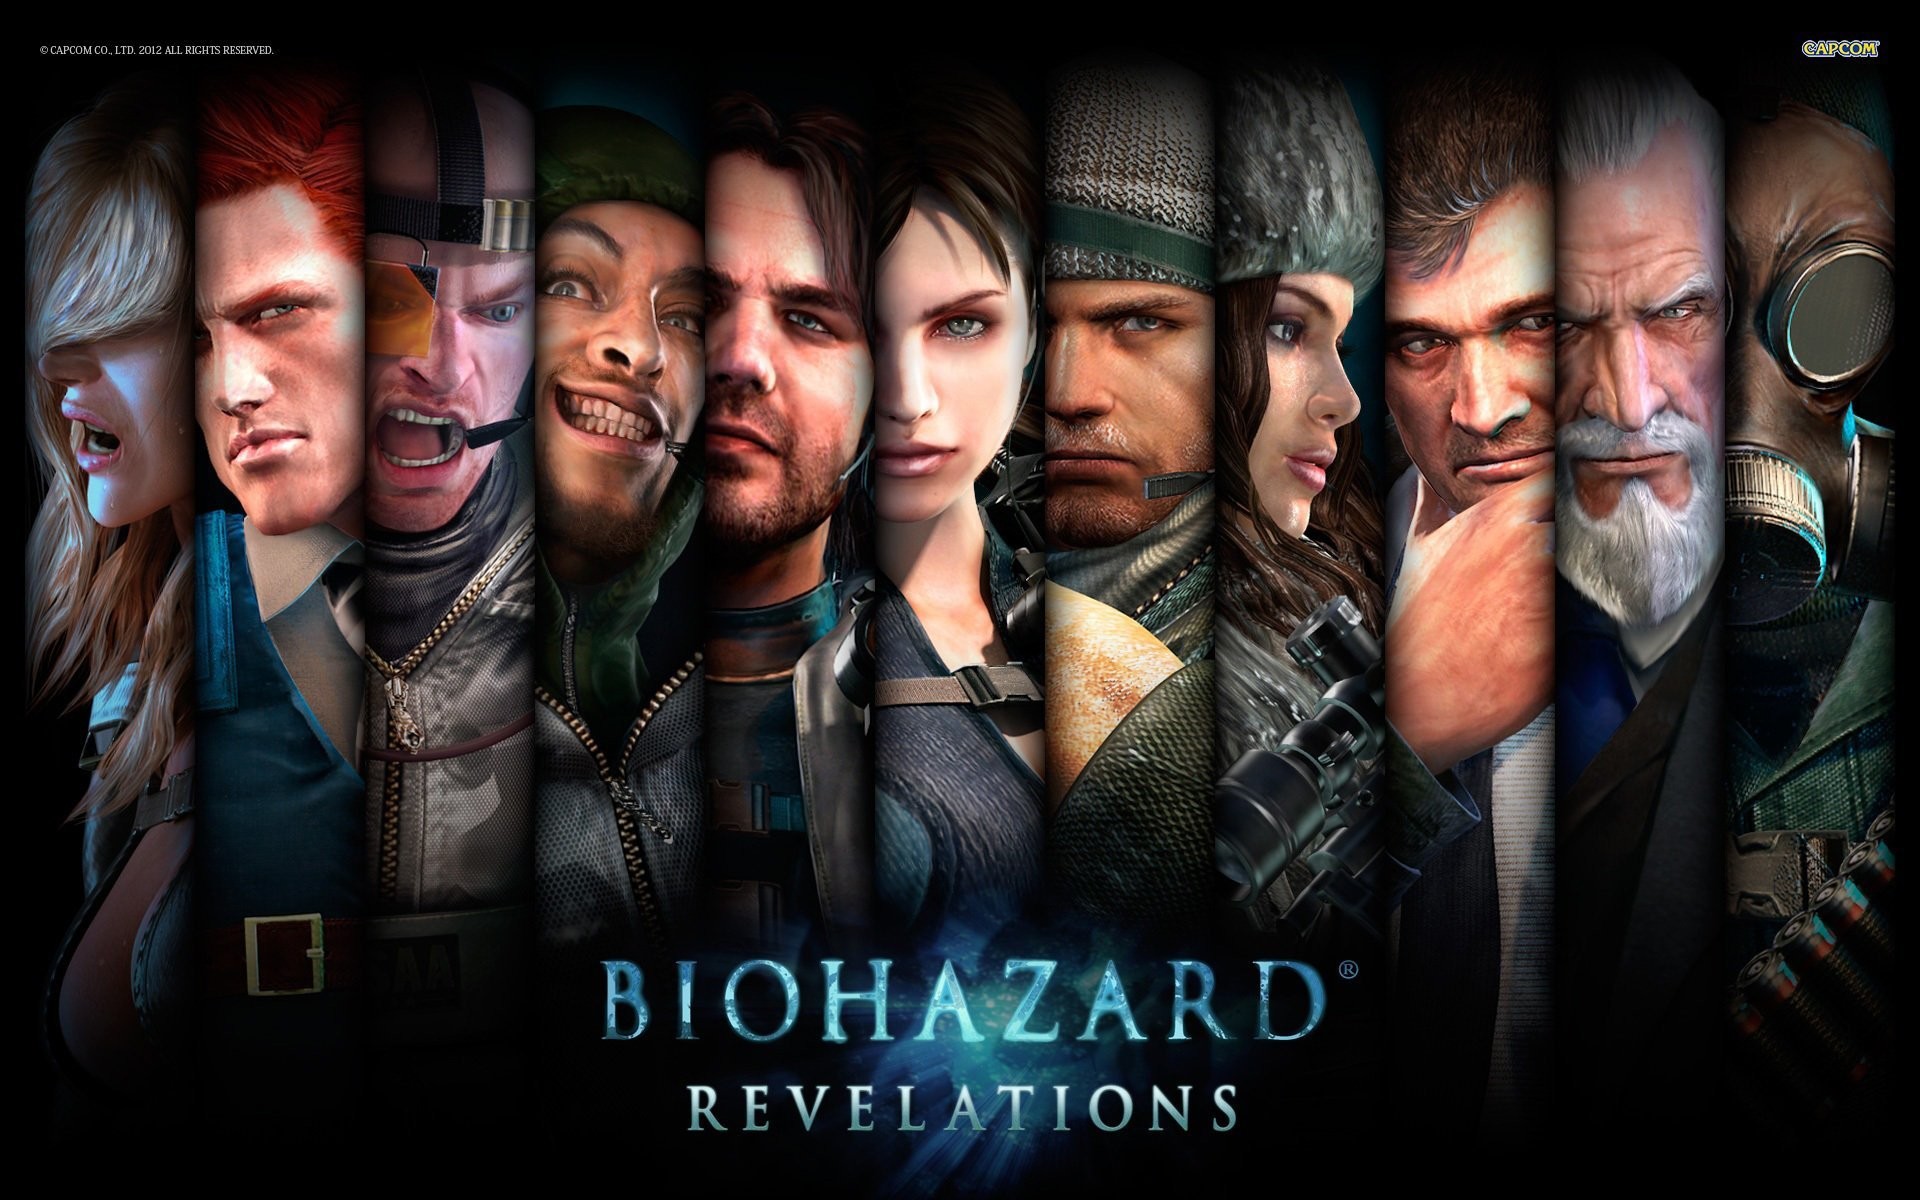 Resident evil revelations characters characters resident evil revelations jill valentine jill valentine parker luciani